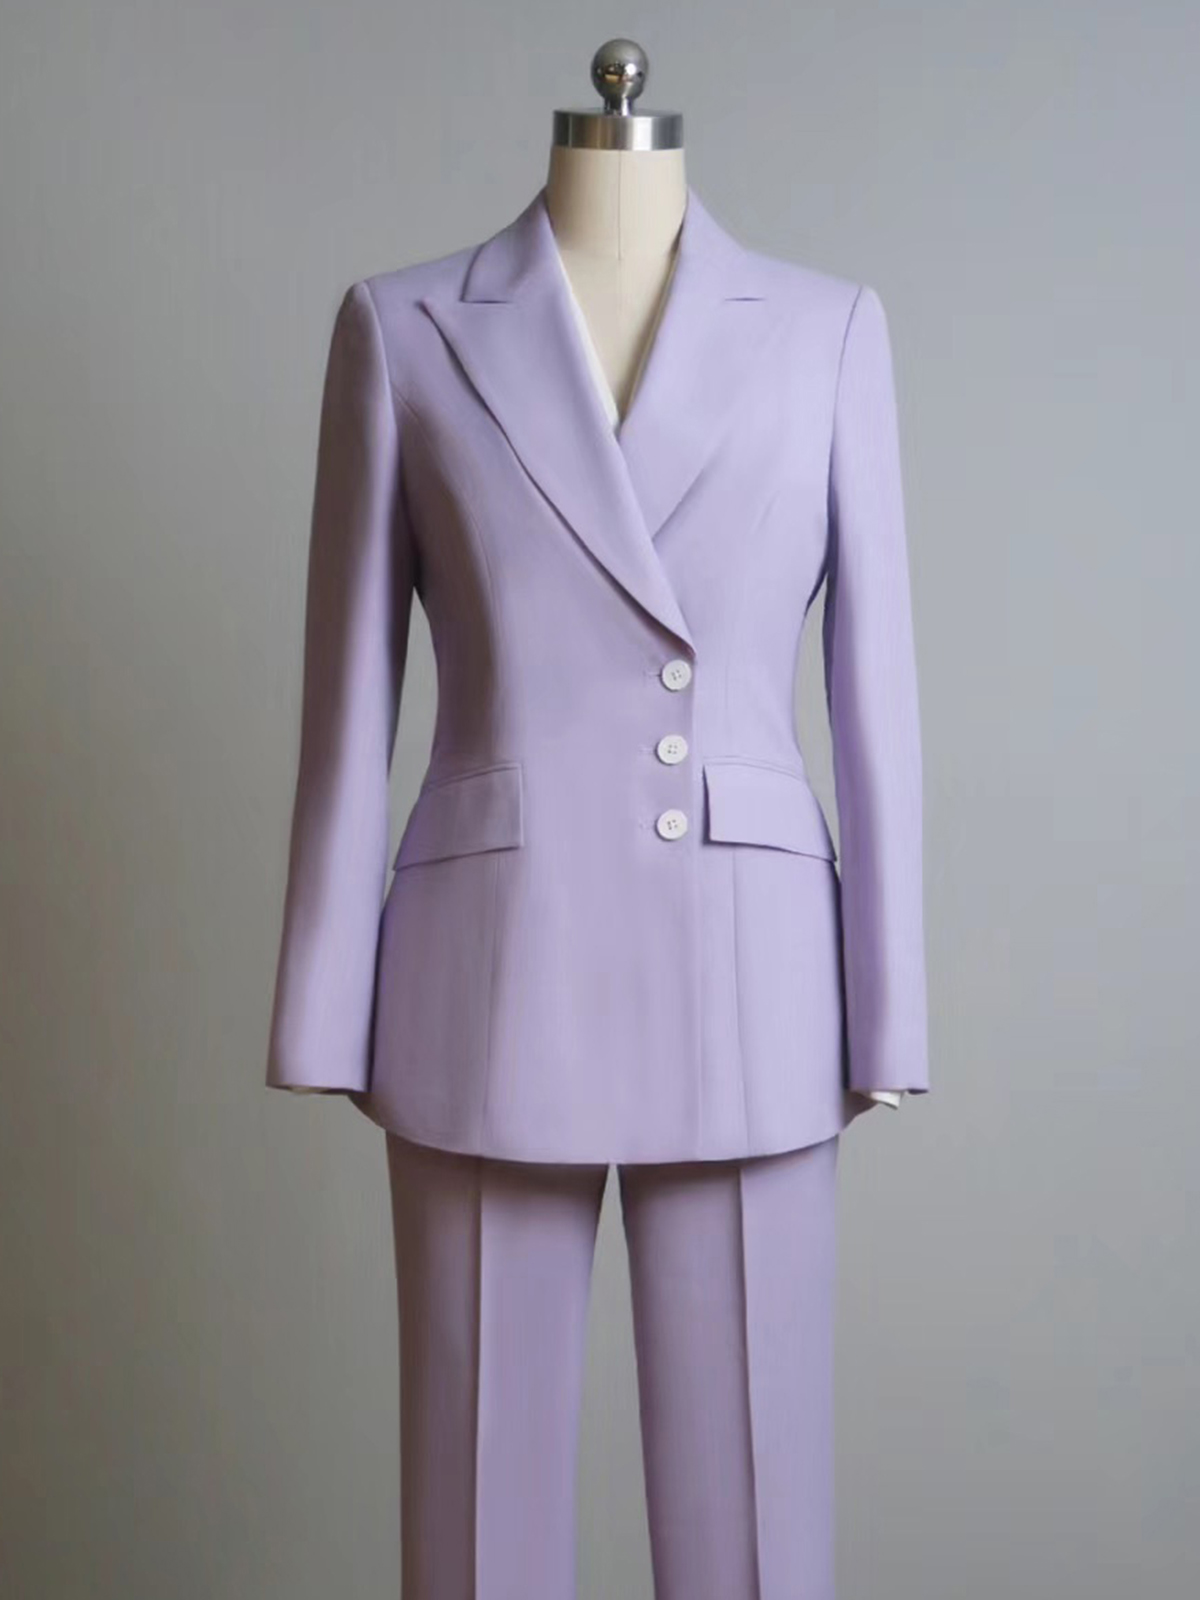 【Green Label】Fashion Style Double Breasted Women's Suit